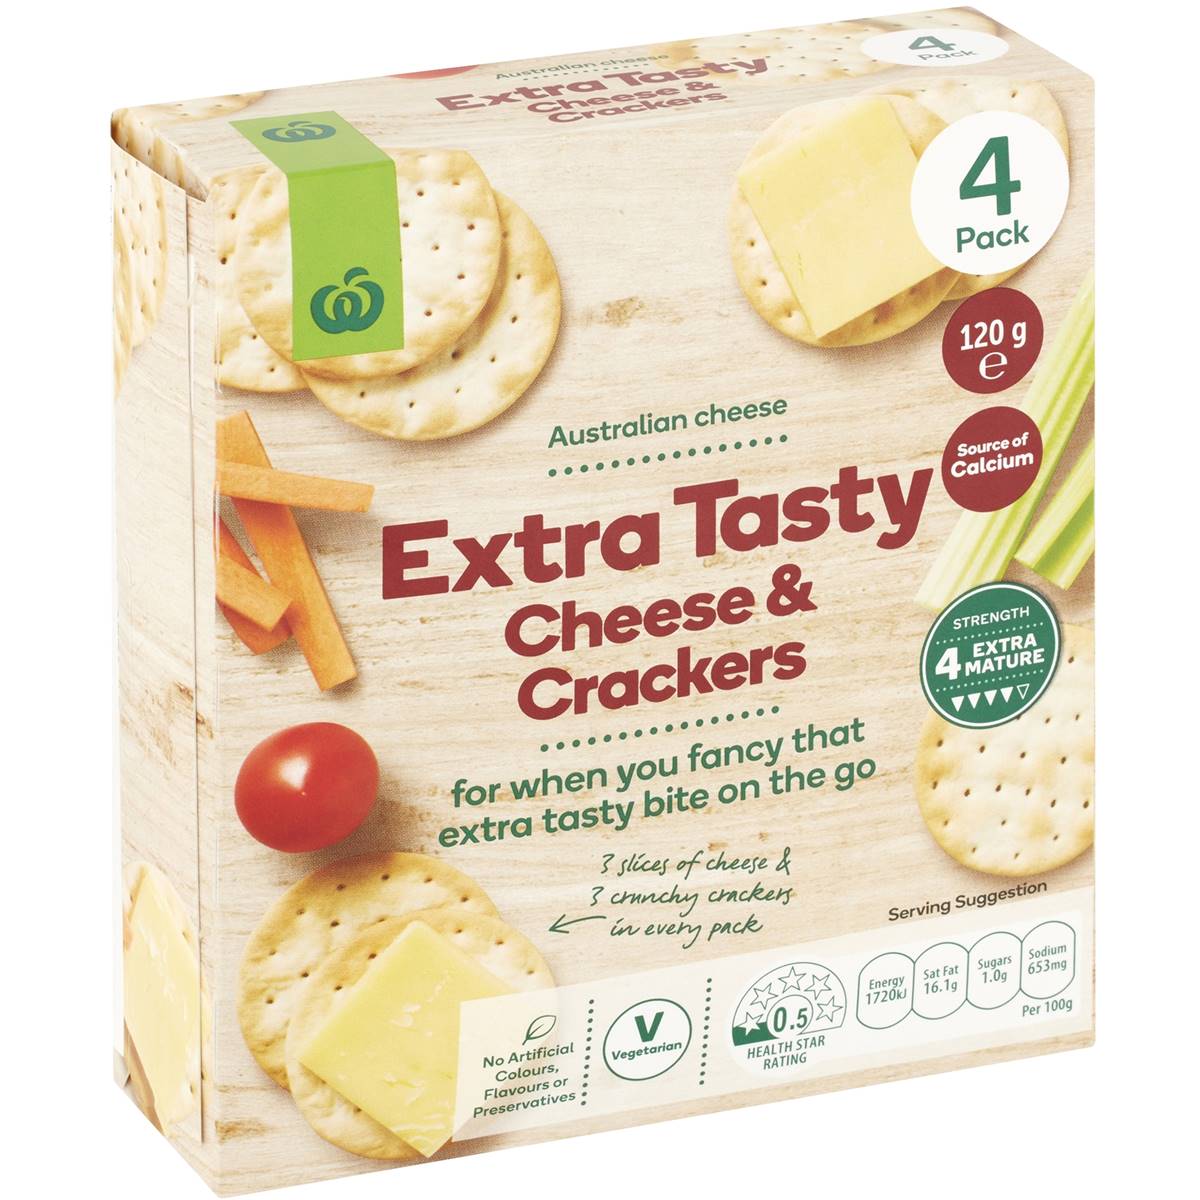 Calories in Woolworths Extra Tasty Cheese & Crackers